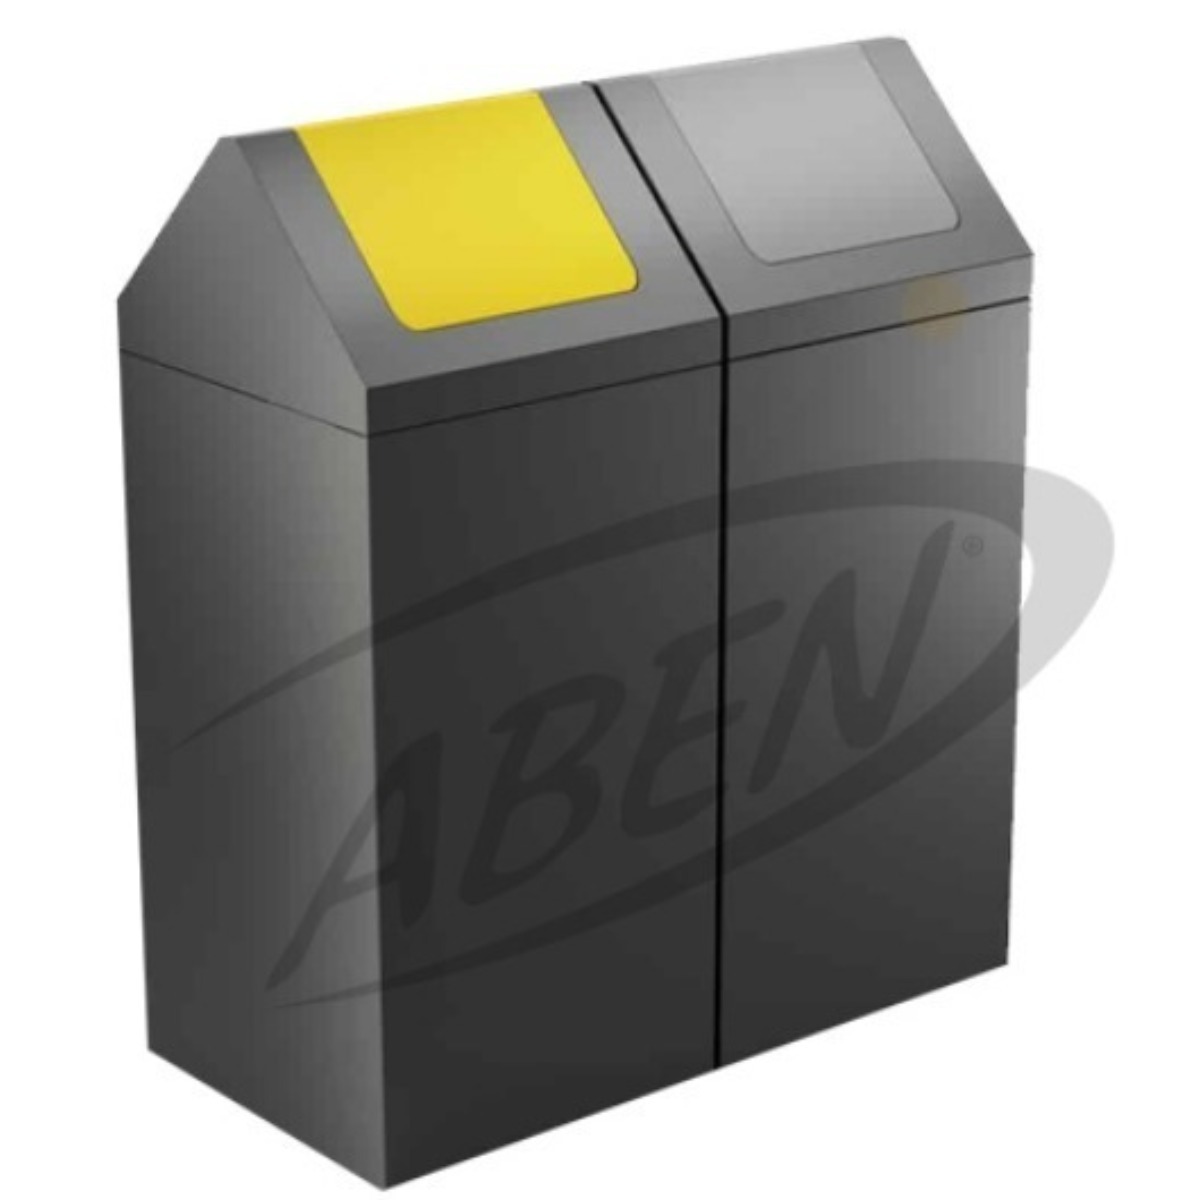 AB-773 2'Part Recycle Bin product logo